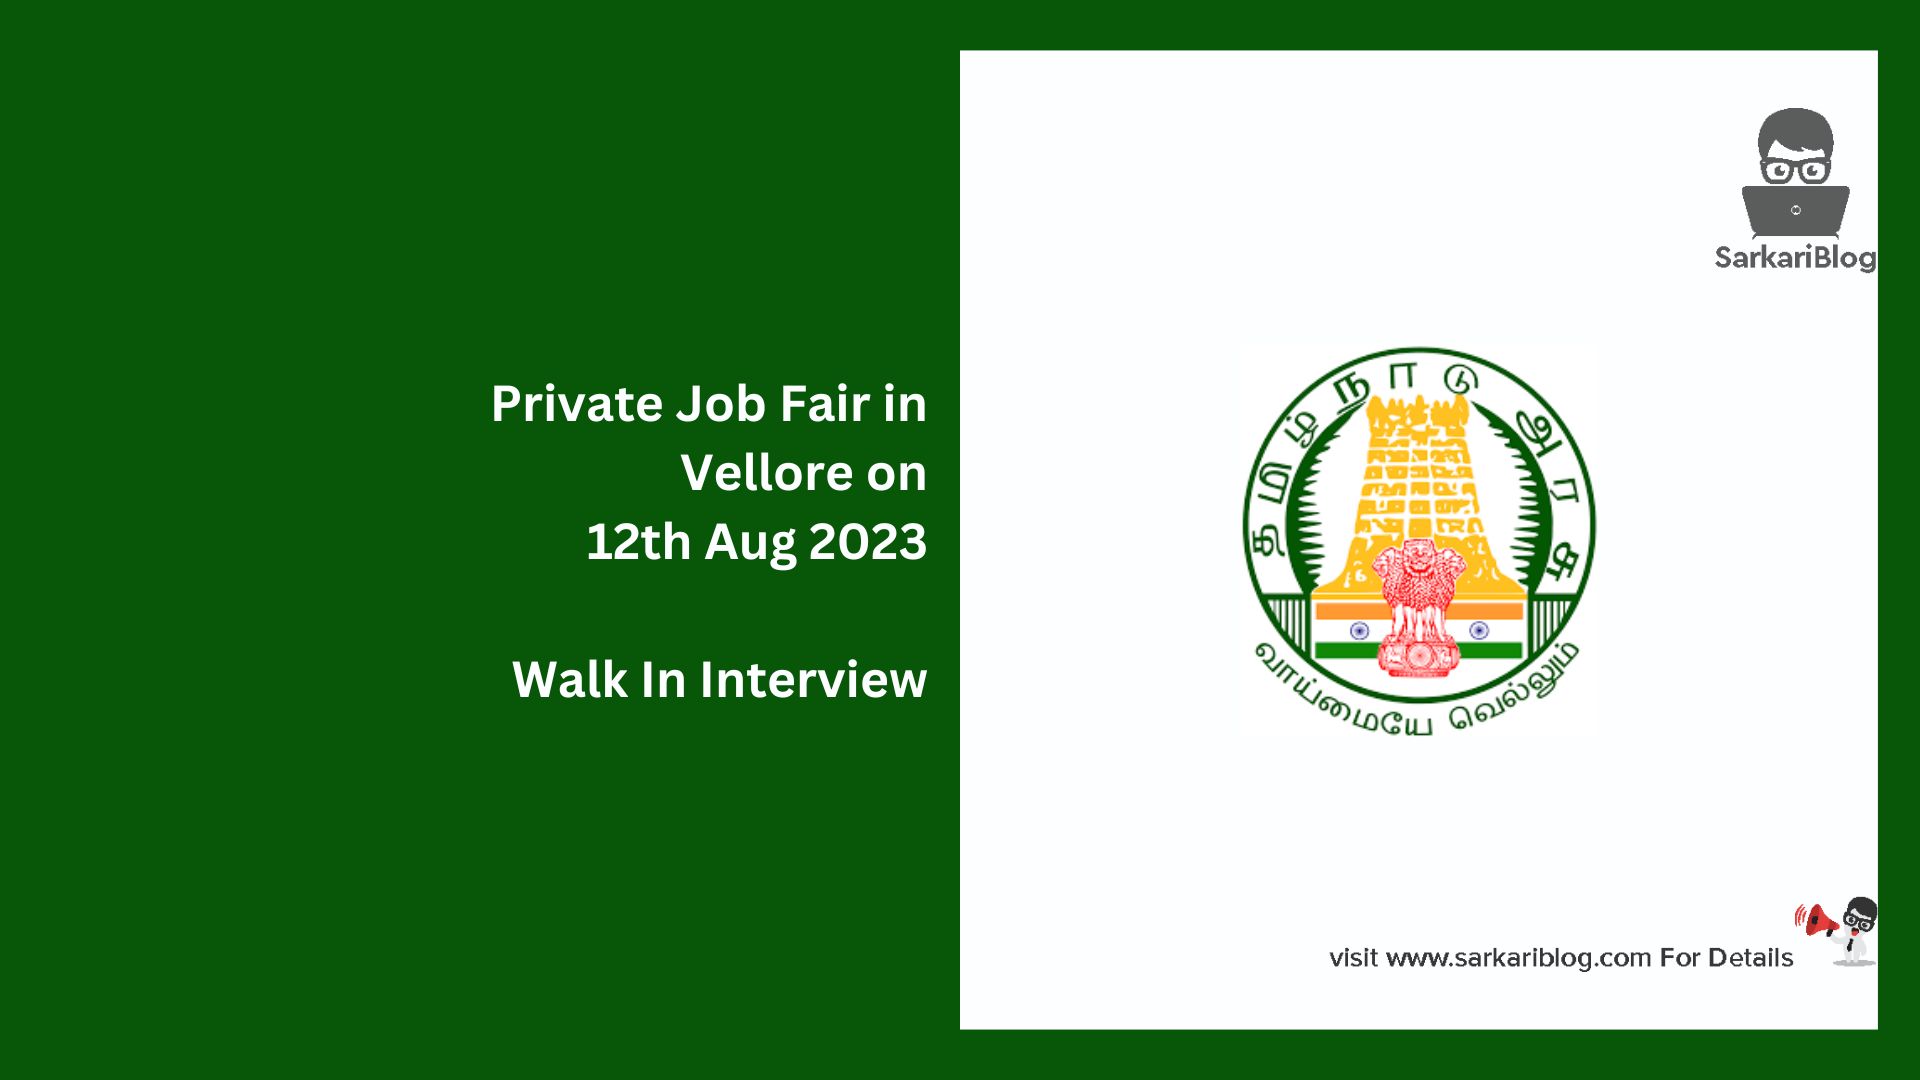 Private Job Fair in Vellore on 12th Aug 2023